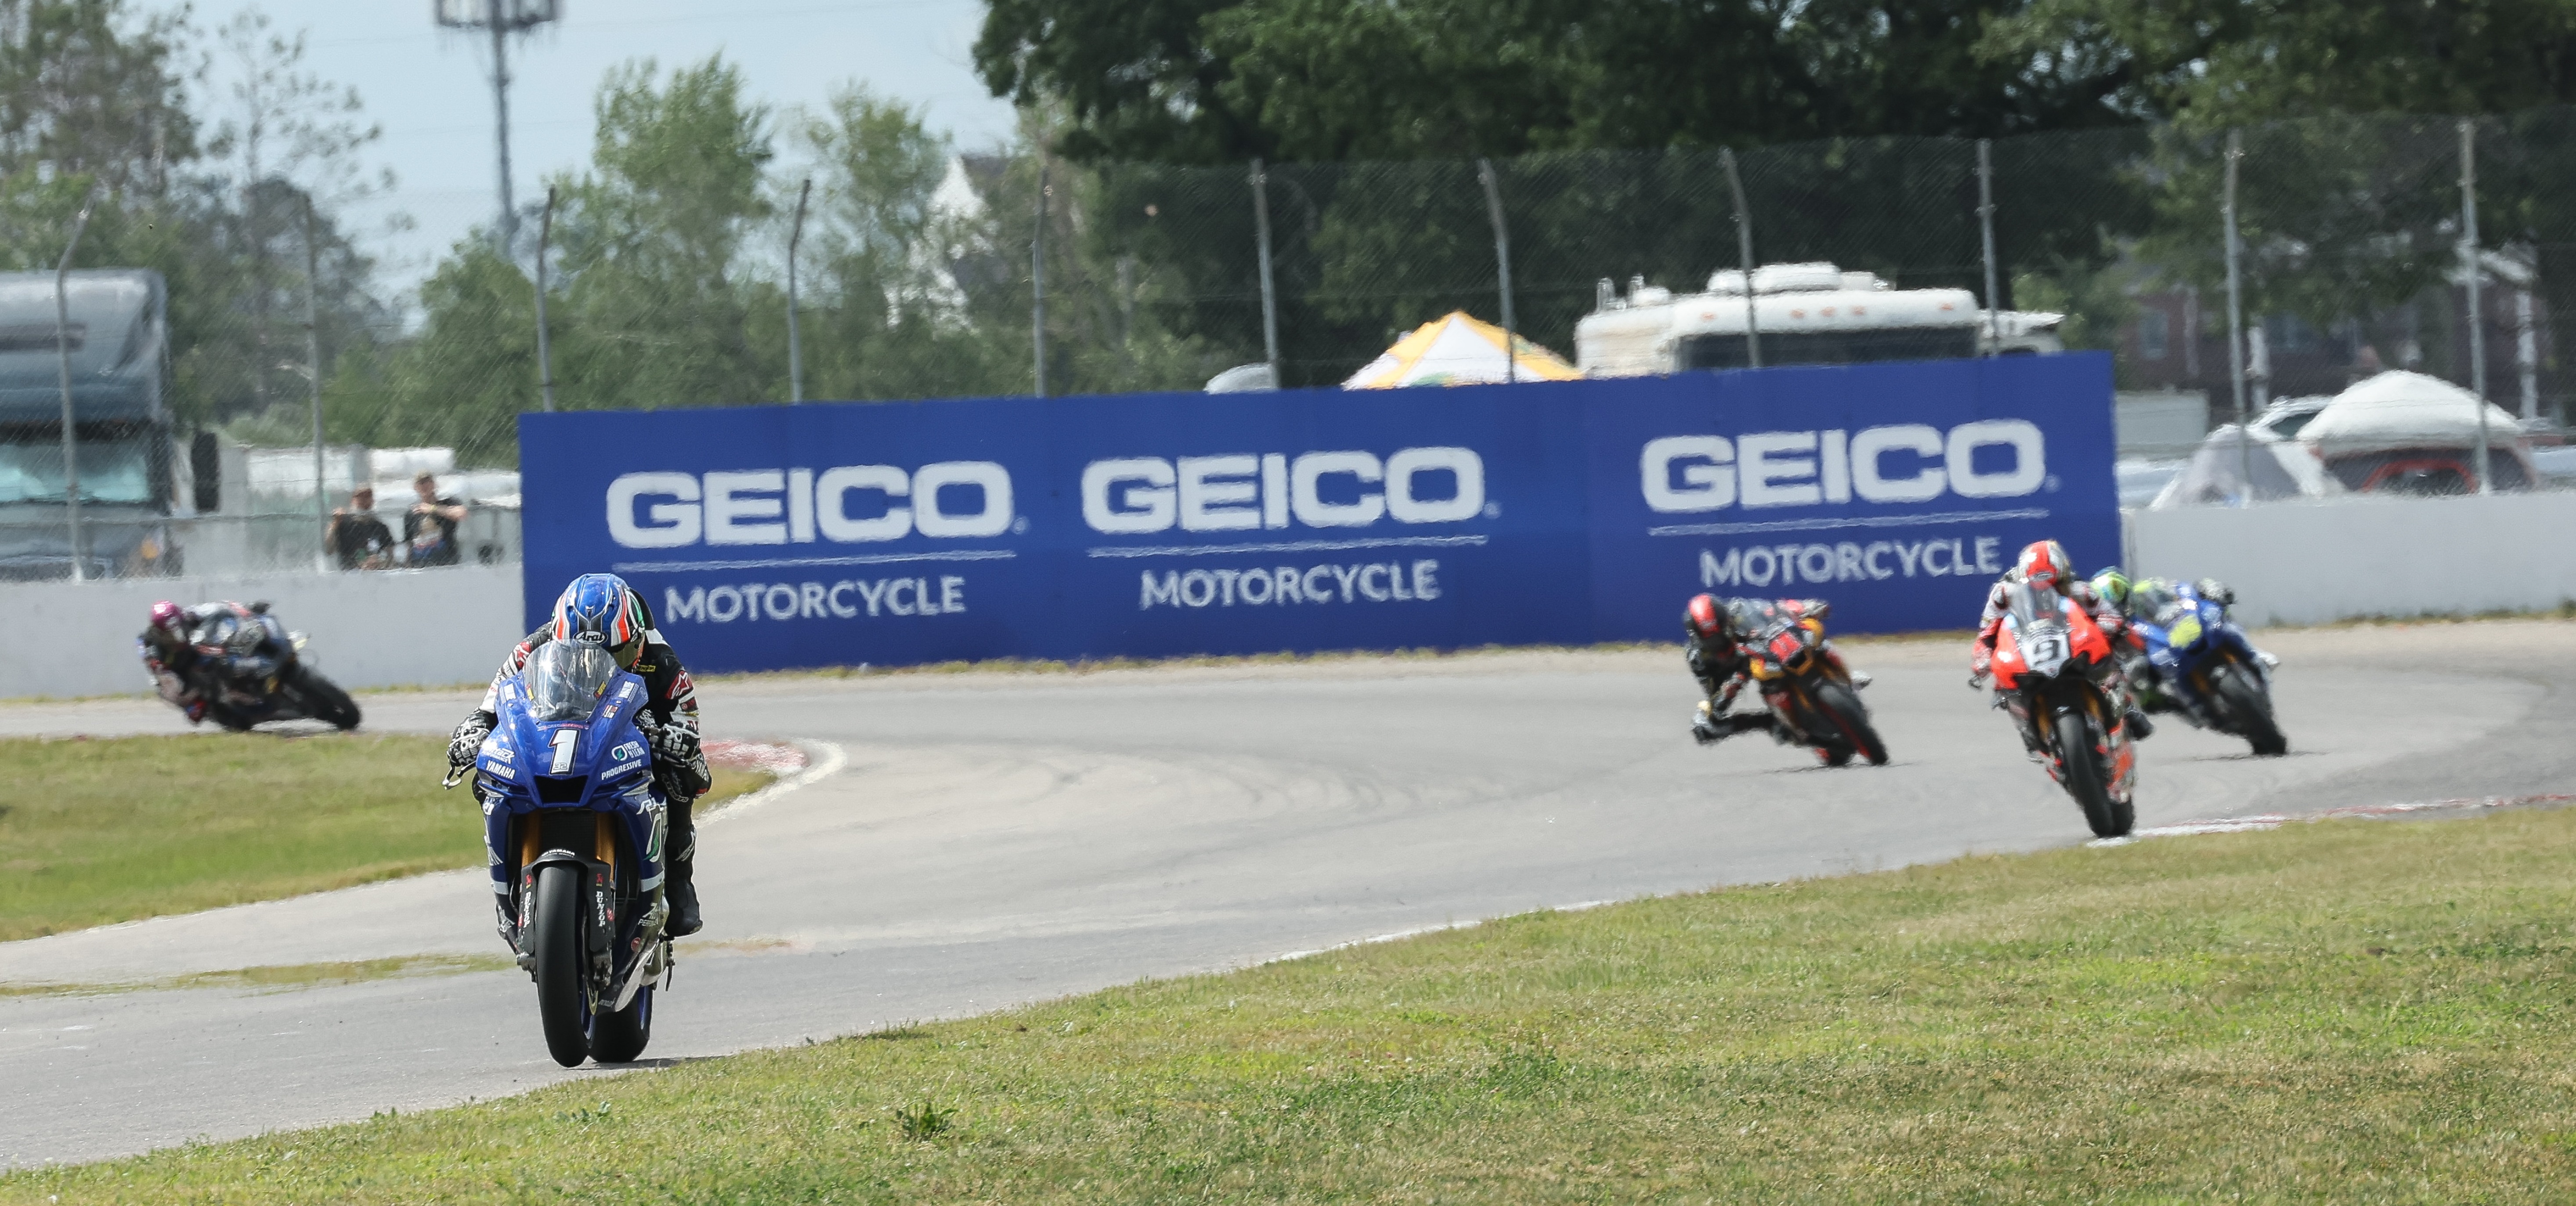 Jake Gagne leading Danilo Petrucci by a wide margin on the track at Brainerd International Raceway